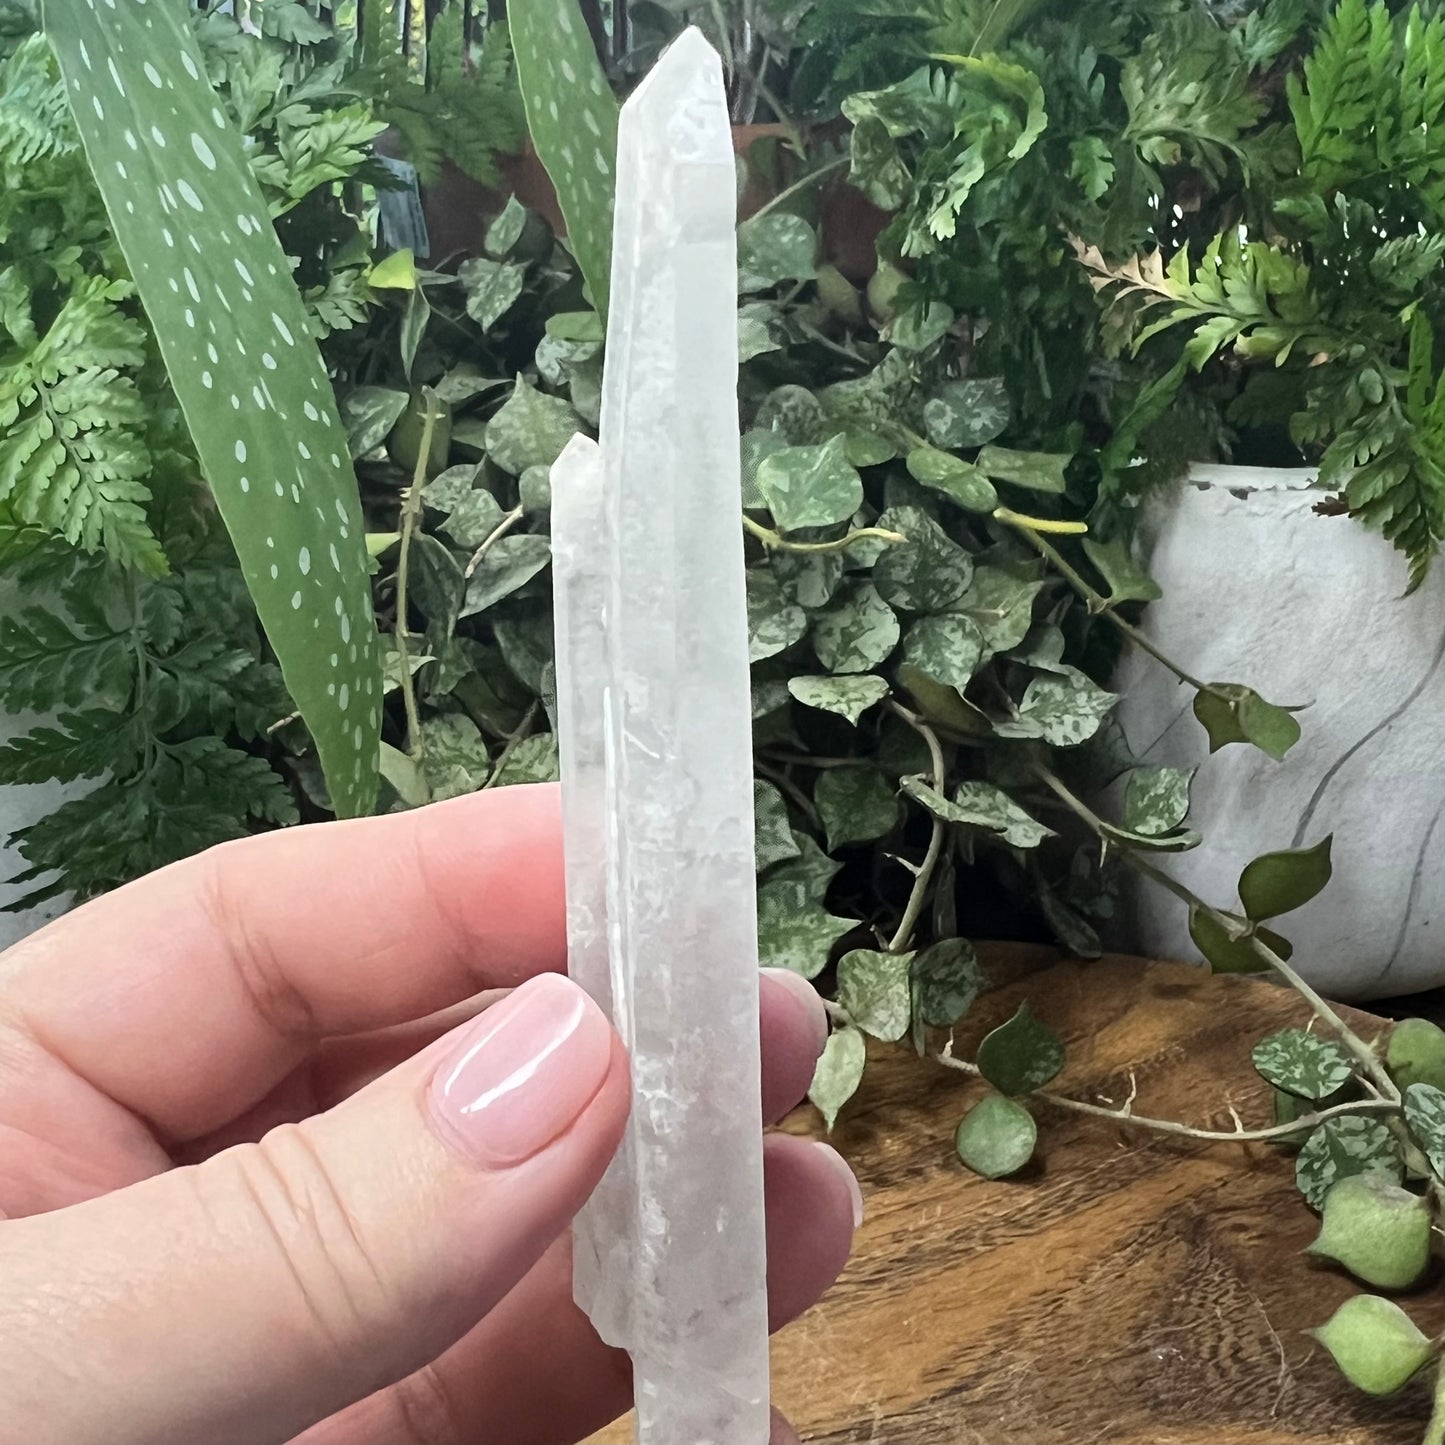 Inner Mongolian Quartz Tabby Point with wand rider